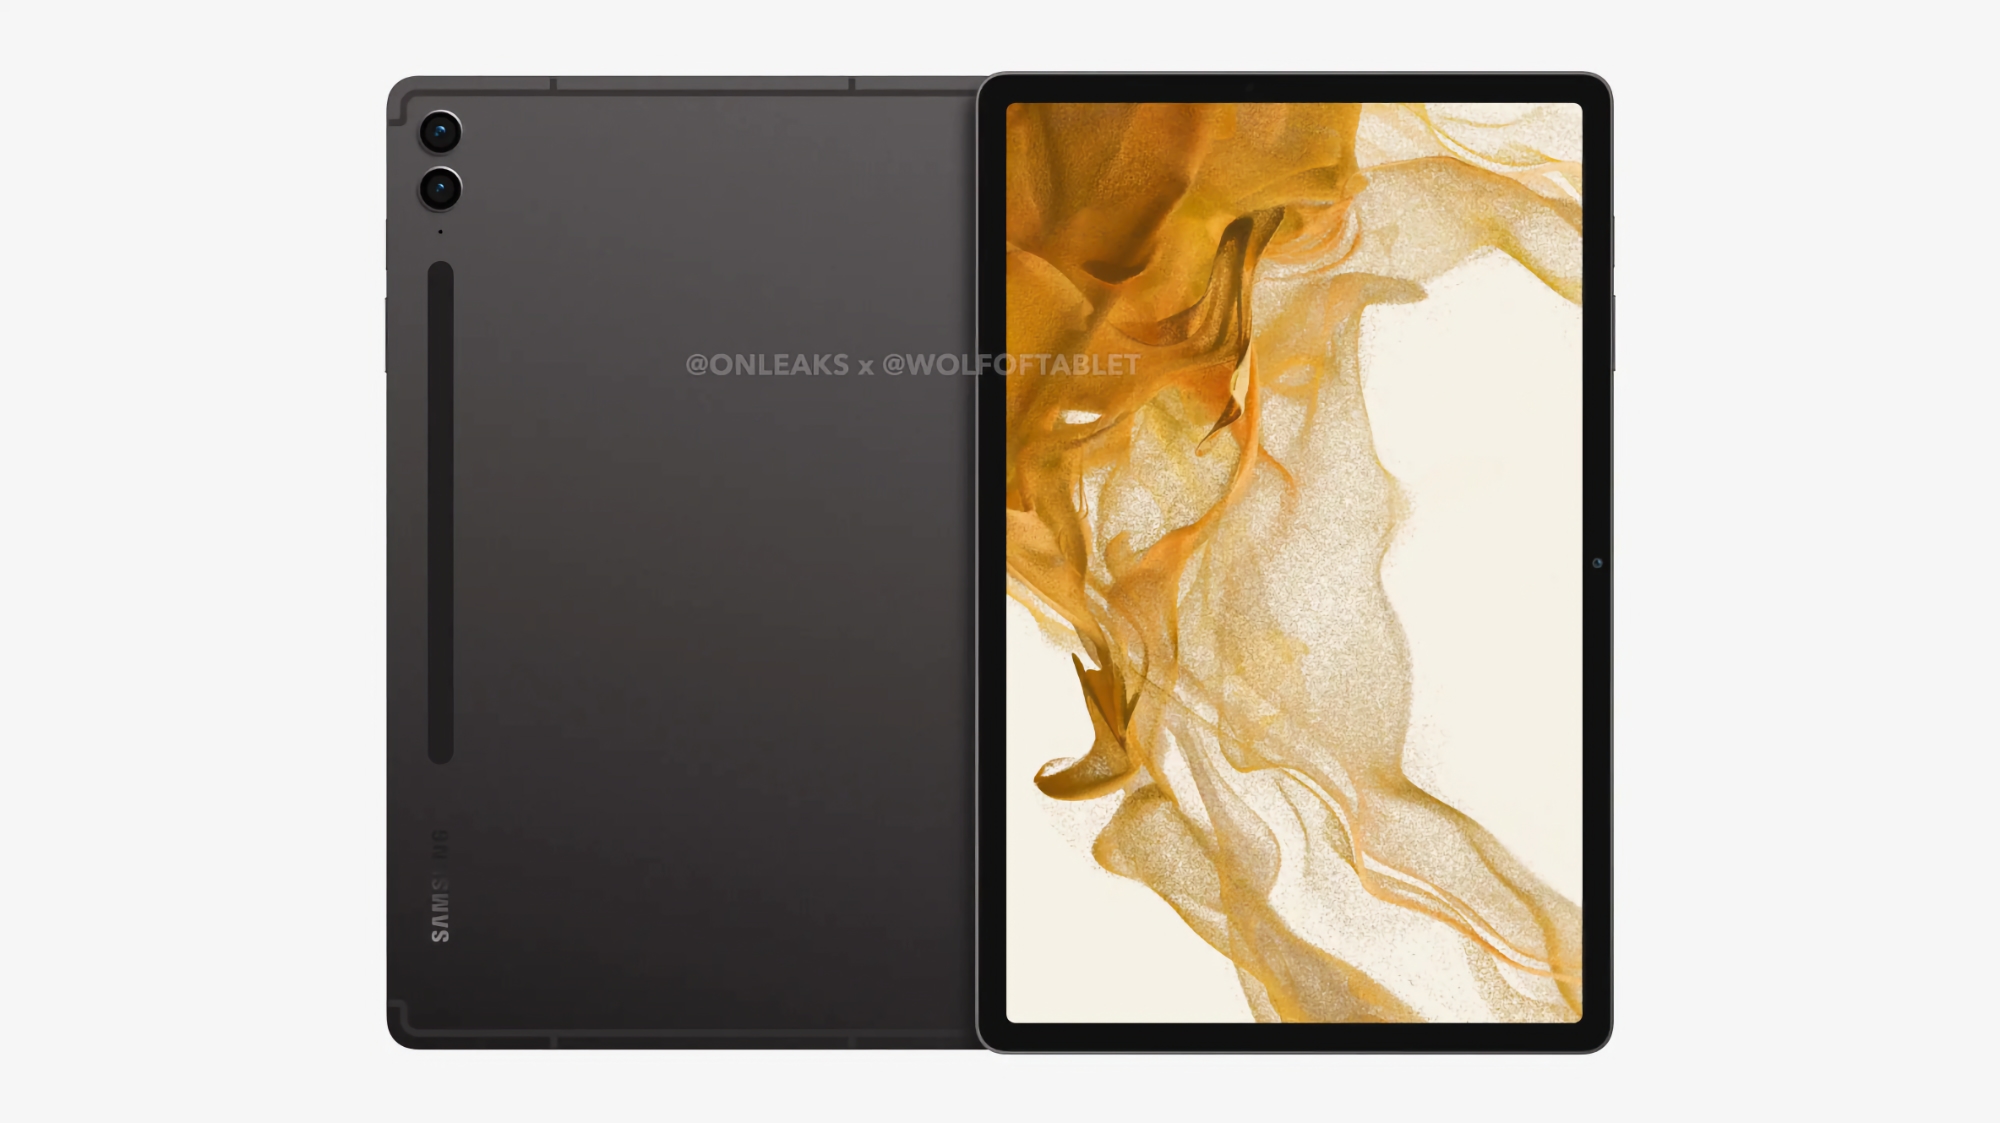 Samsung Galaxy Tab S9 FE+ with 12.4-inch screen and Exynos 1380